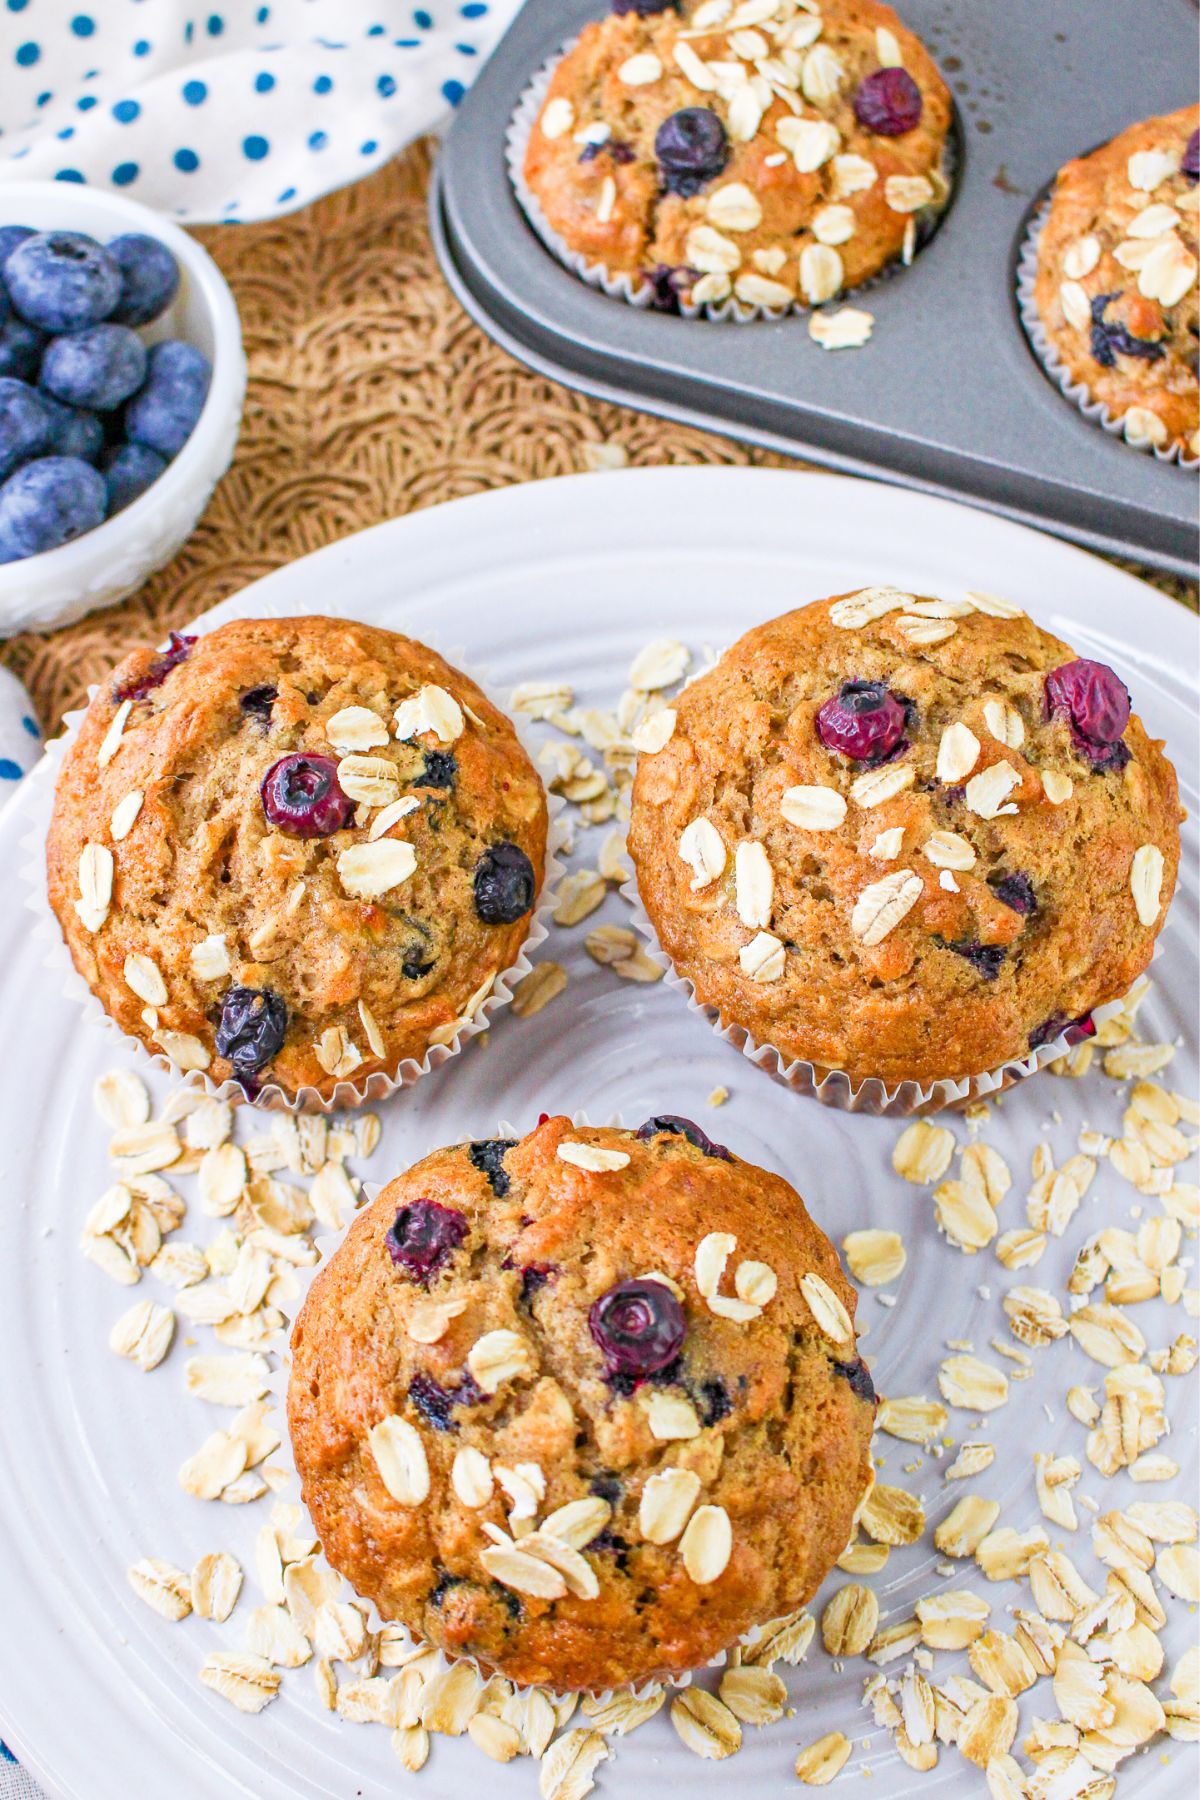 Blueberry muffins with oats and blueberries on a plate.